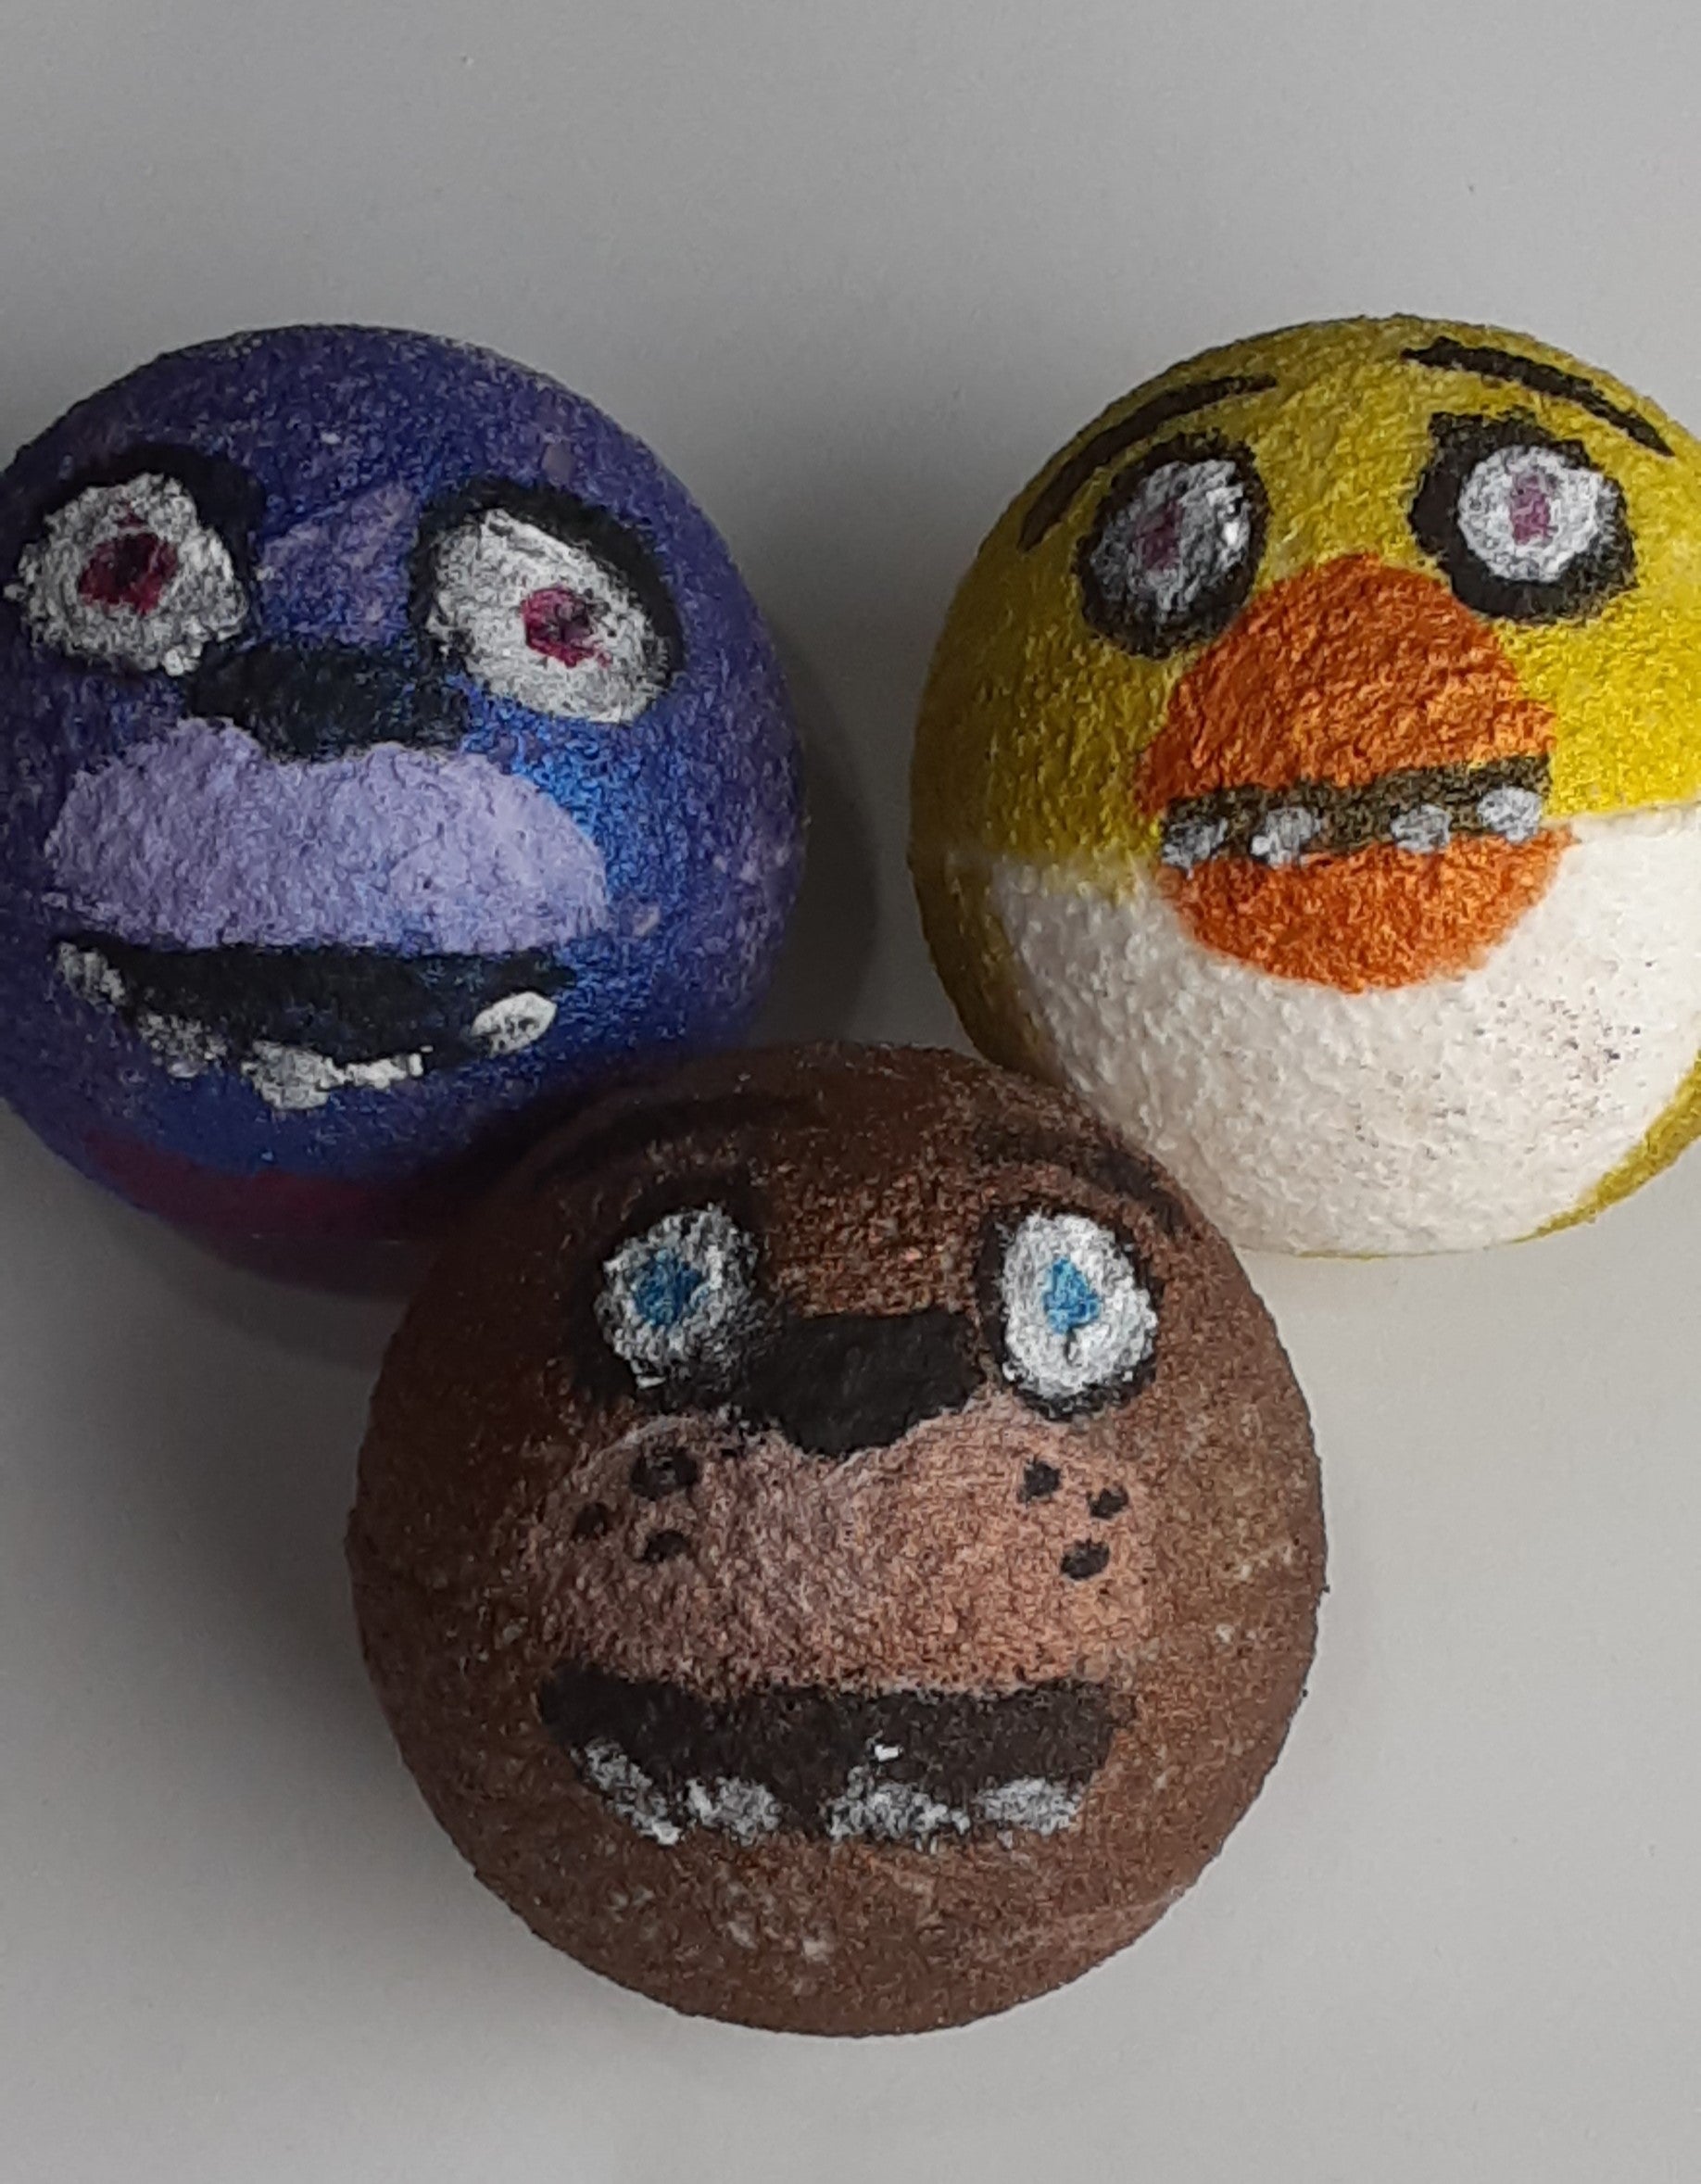 Five Nights at Freddy's Custom Bath bombs for child's birthday party.